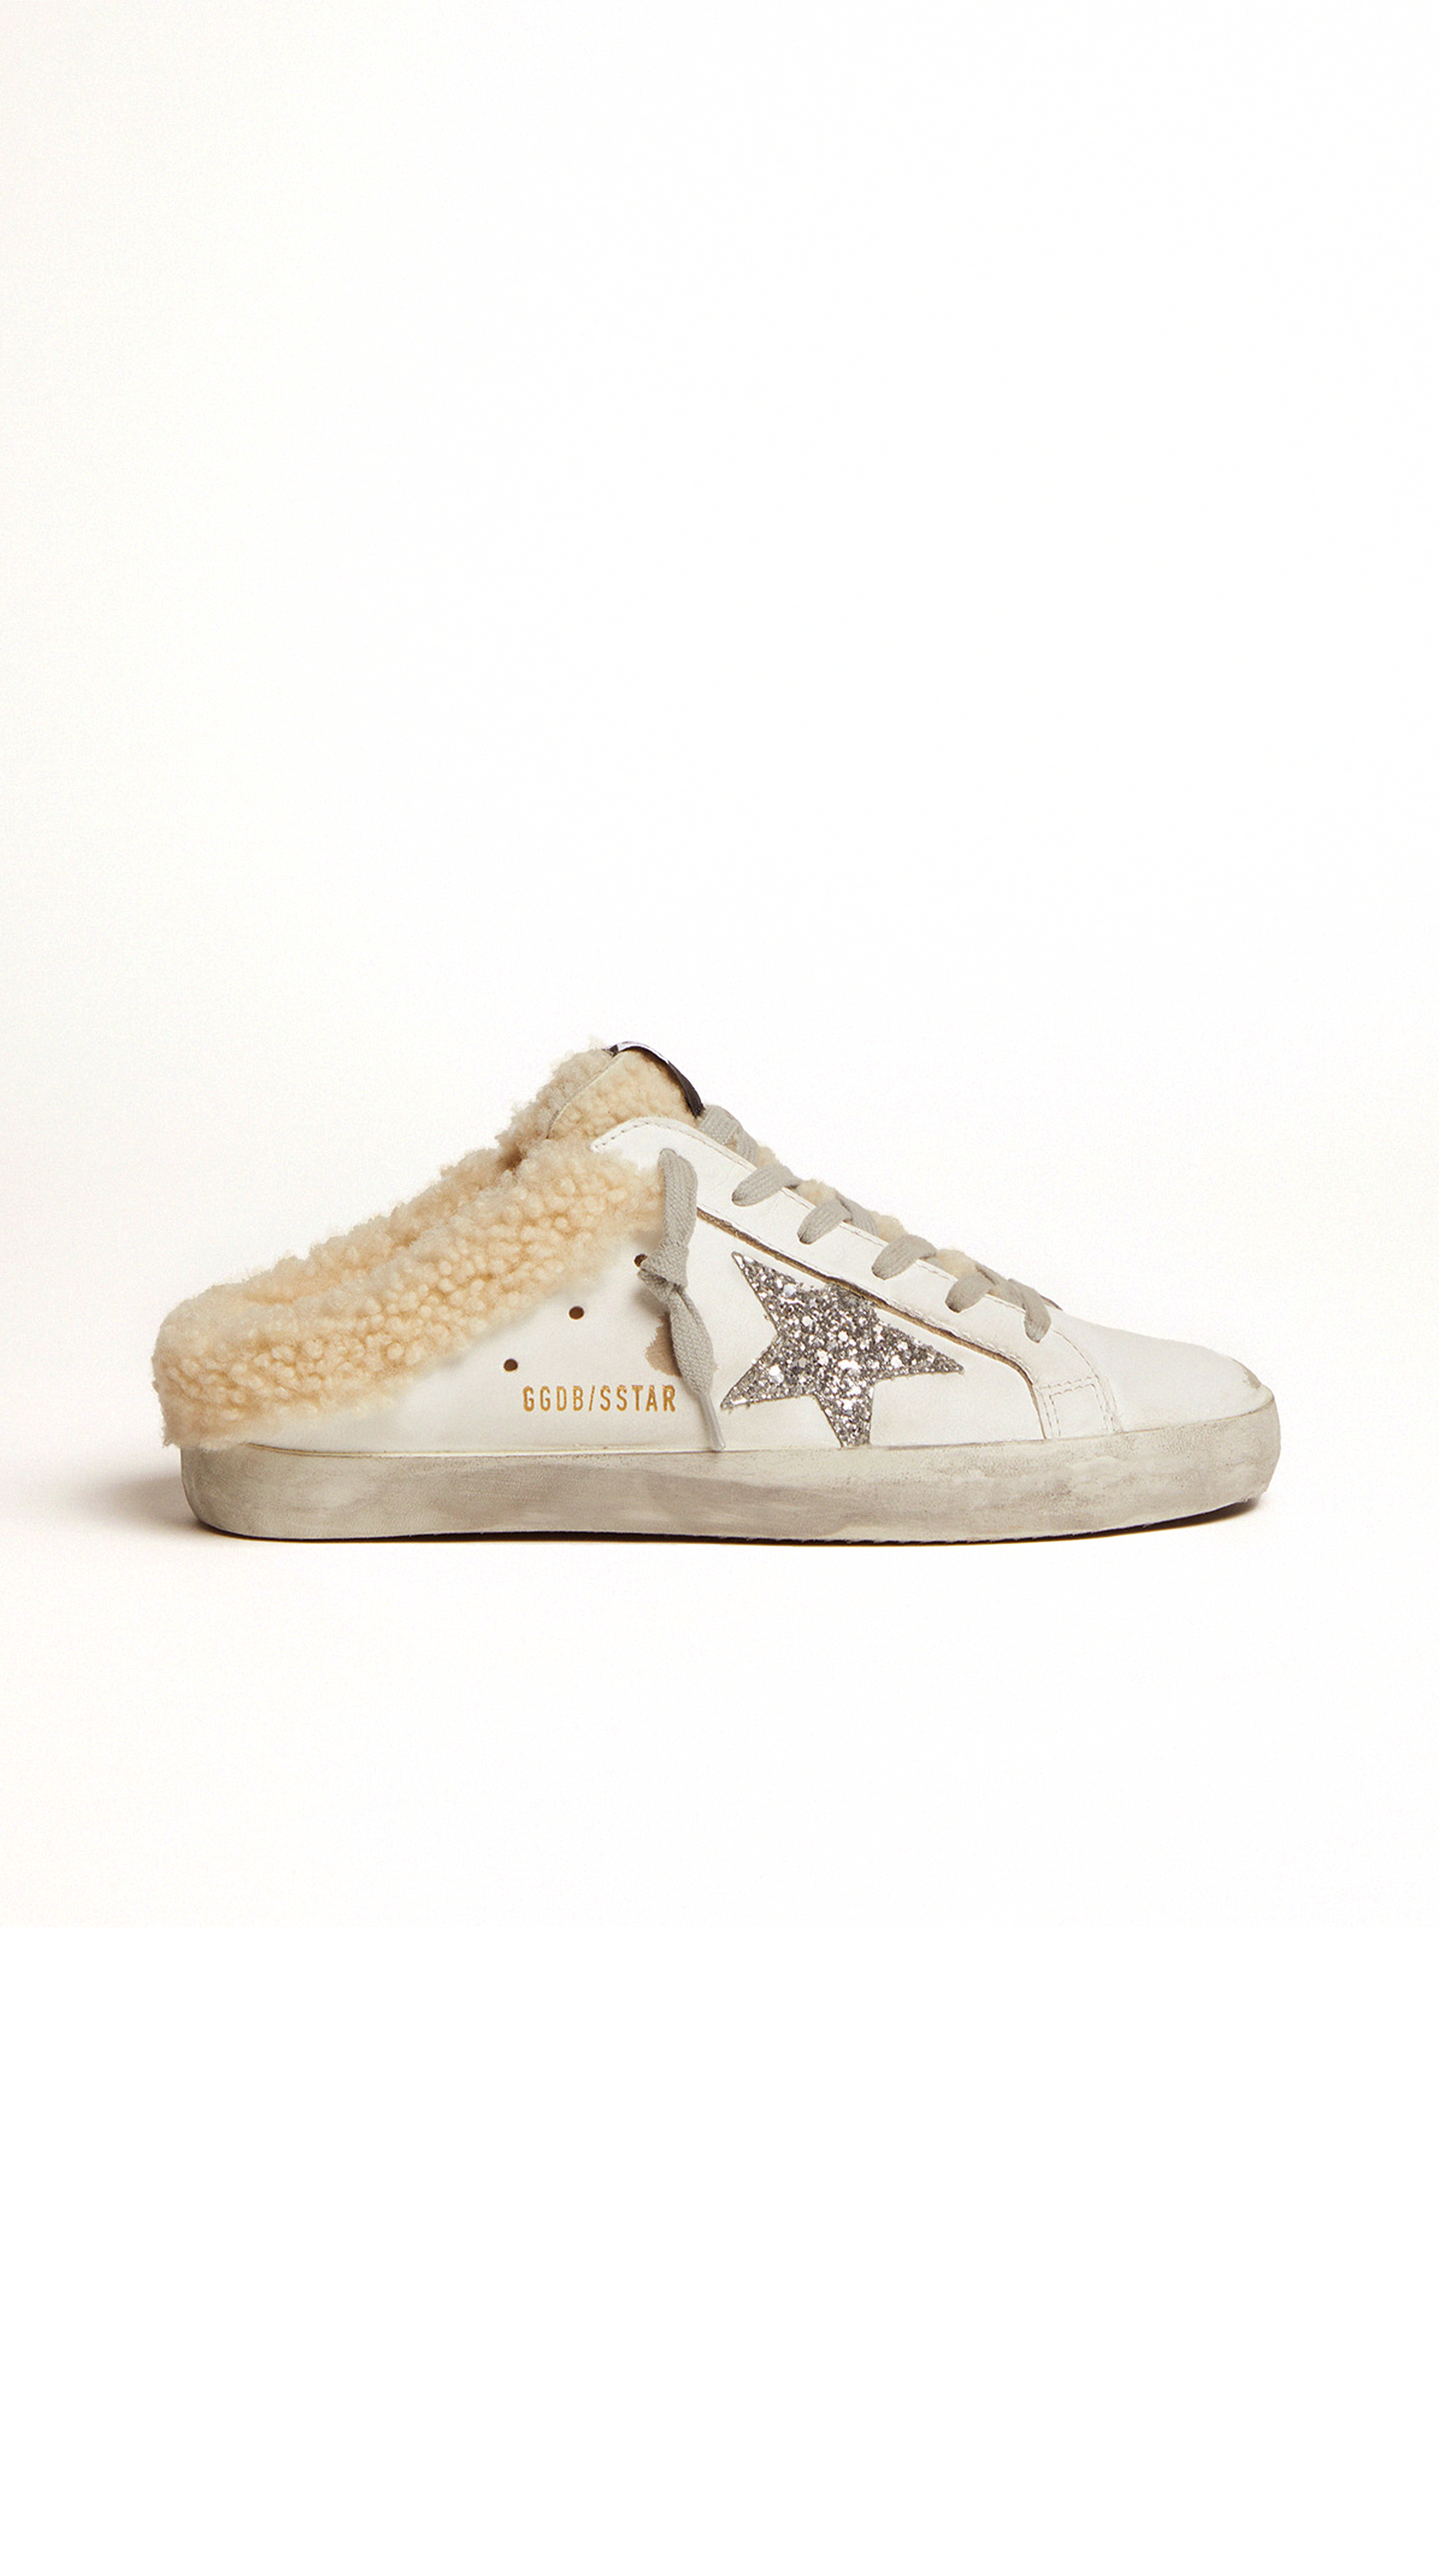 Super-star Mule with Shearling - White